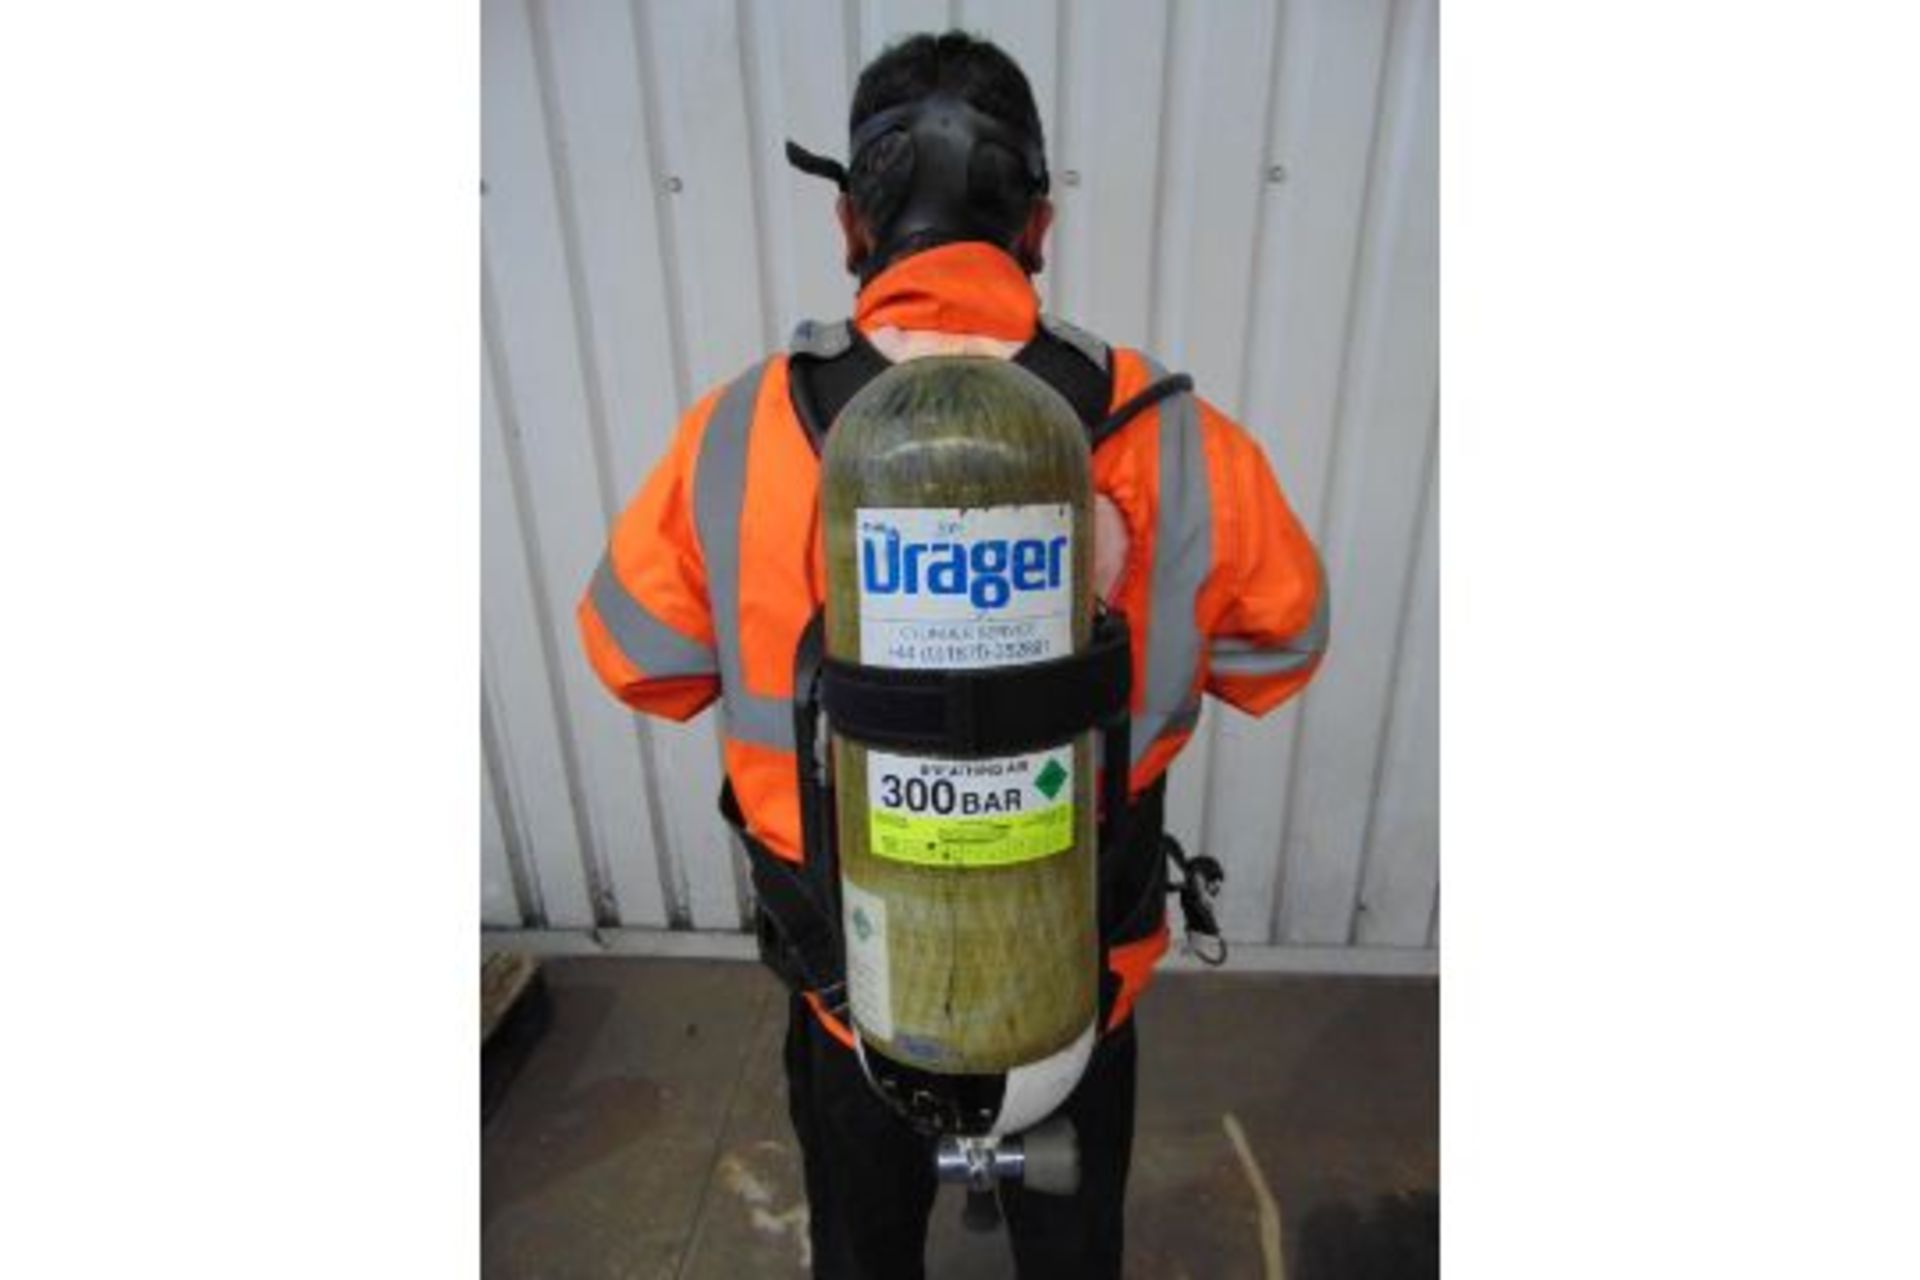 5 x Drager PSS 7000 Self Contained Breathing Apparatus w/ 10 x Drager 300 Bar Air Cylinders - Image 18 of 20